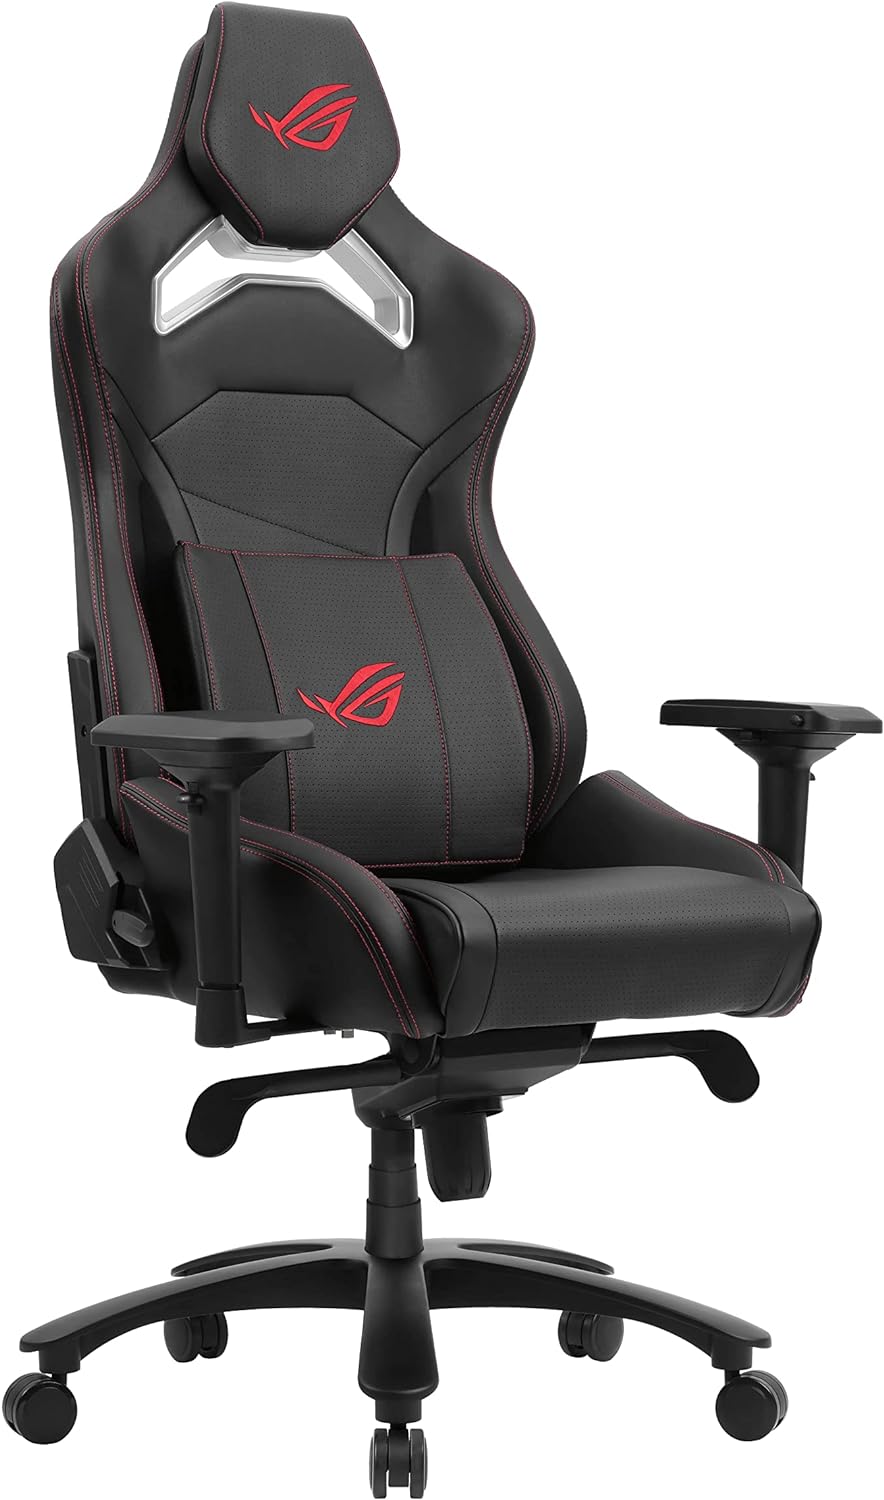 ASUS ROG Chariot Core Gaming Chair in Black with Red Stitching, designed for ultimate comfort. 4718017322782